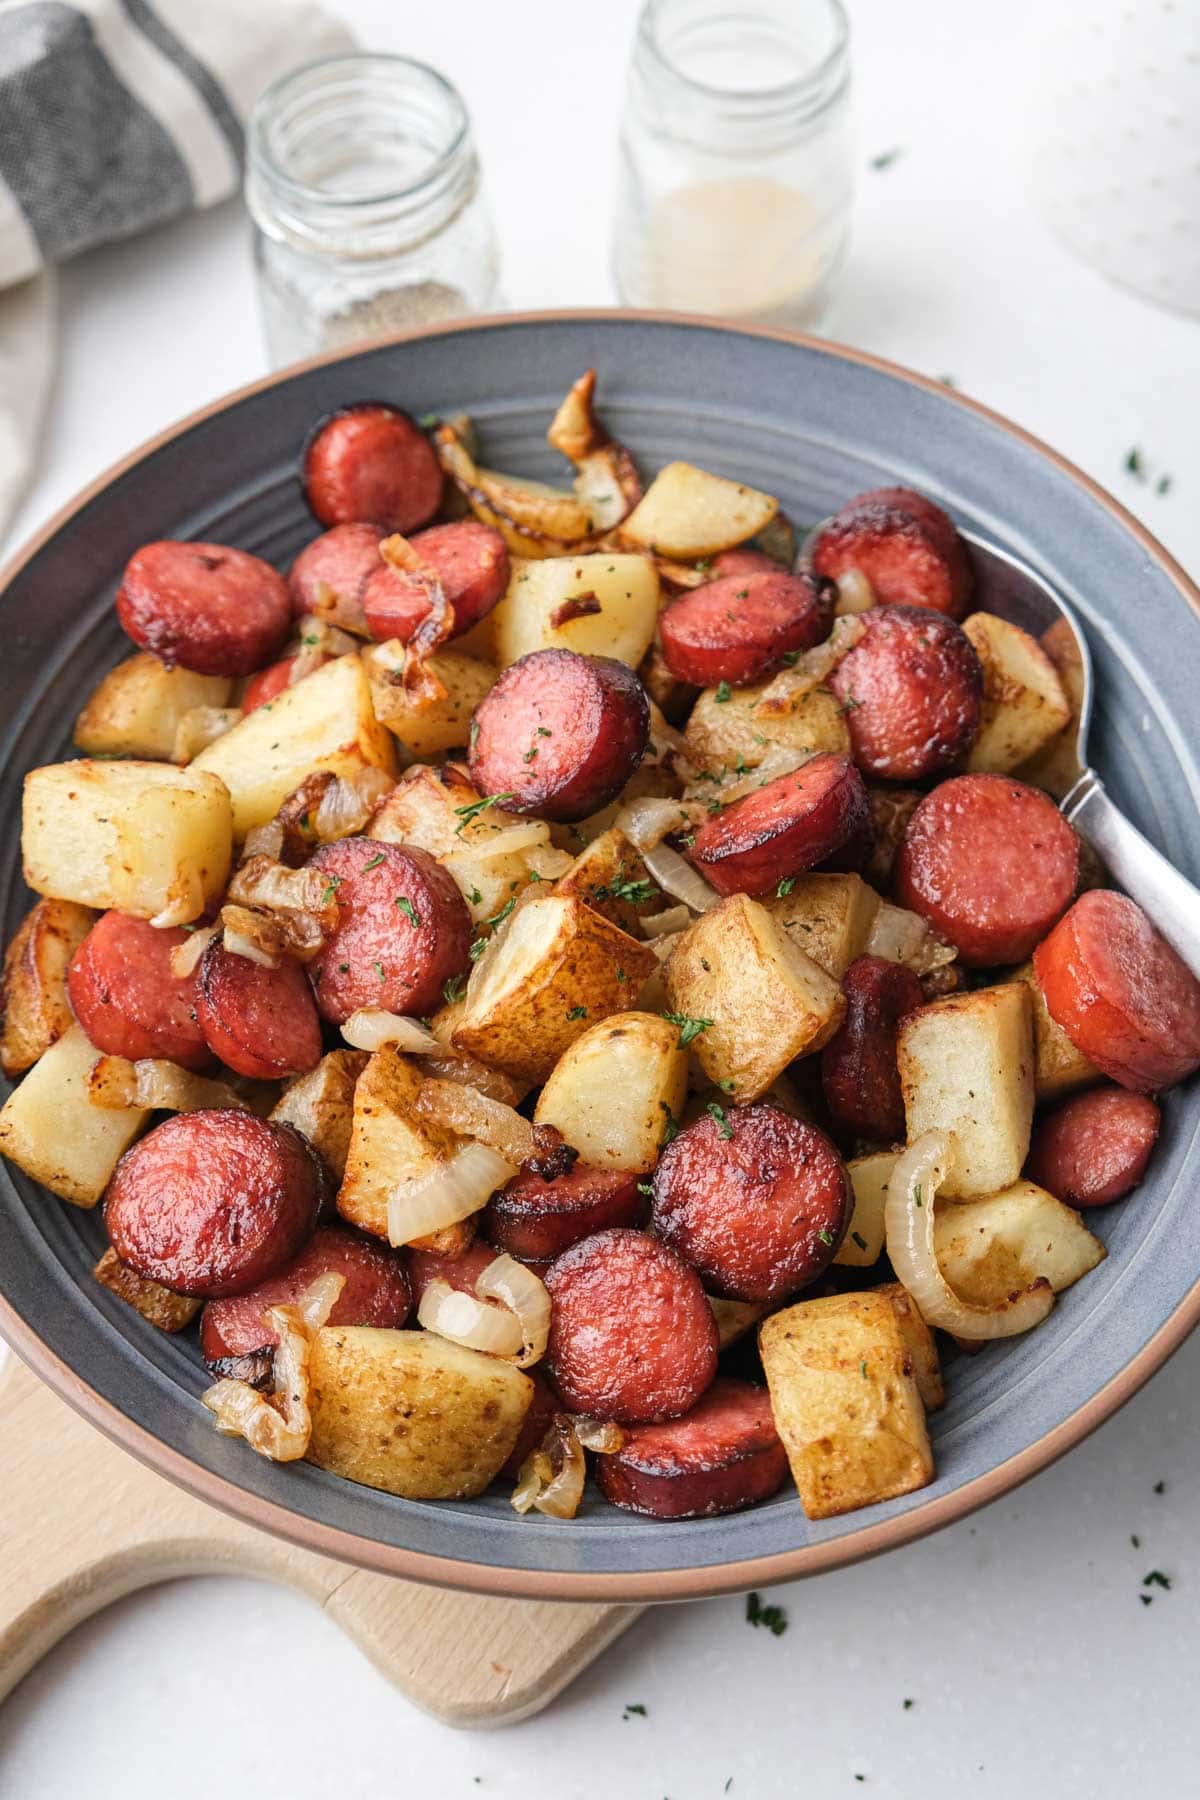 cooked potato pieces with sausage pieces and onions in blue bowl with white counter around.